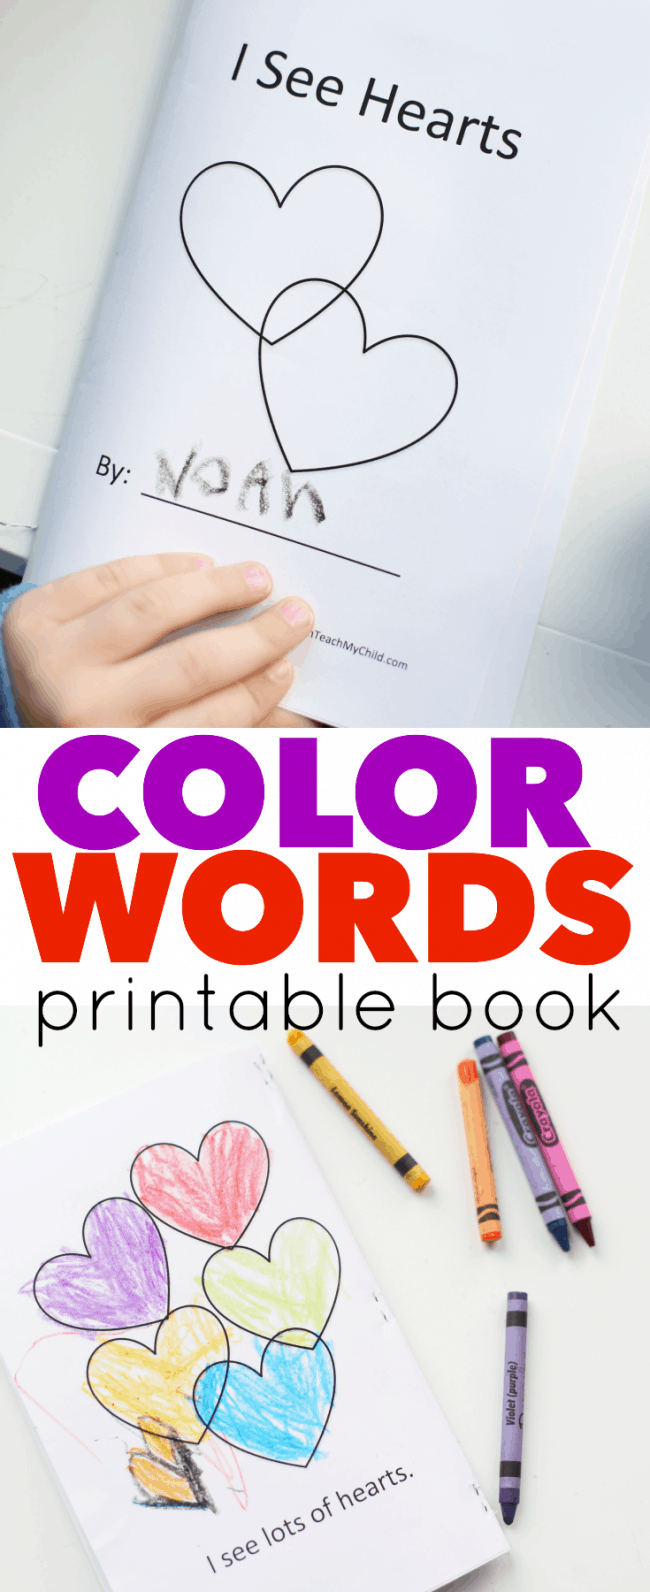 Color Words Printable Book for Valentine’s Day